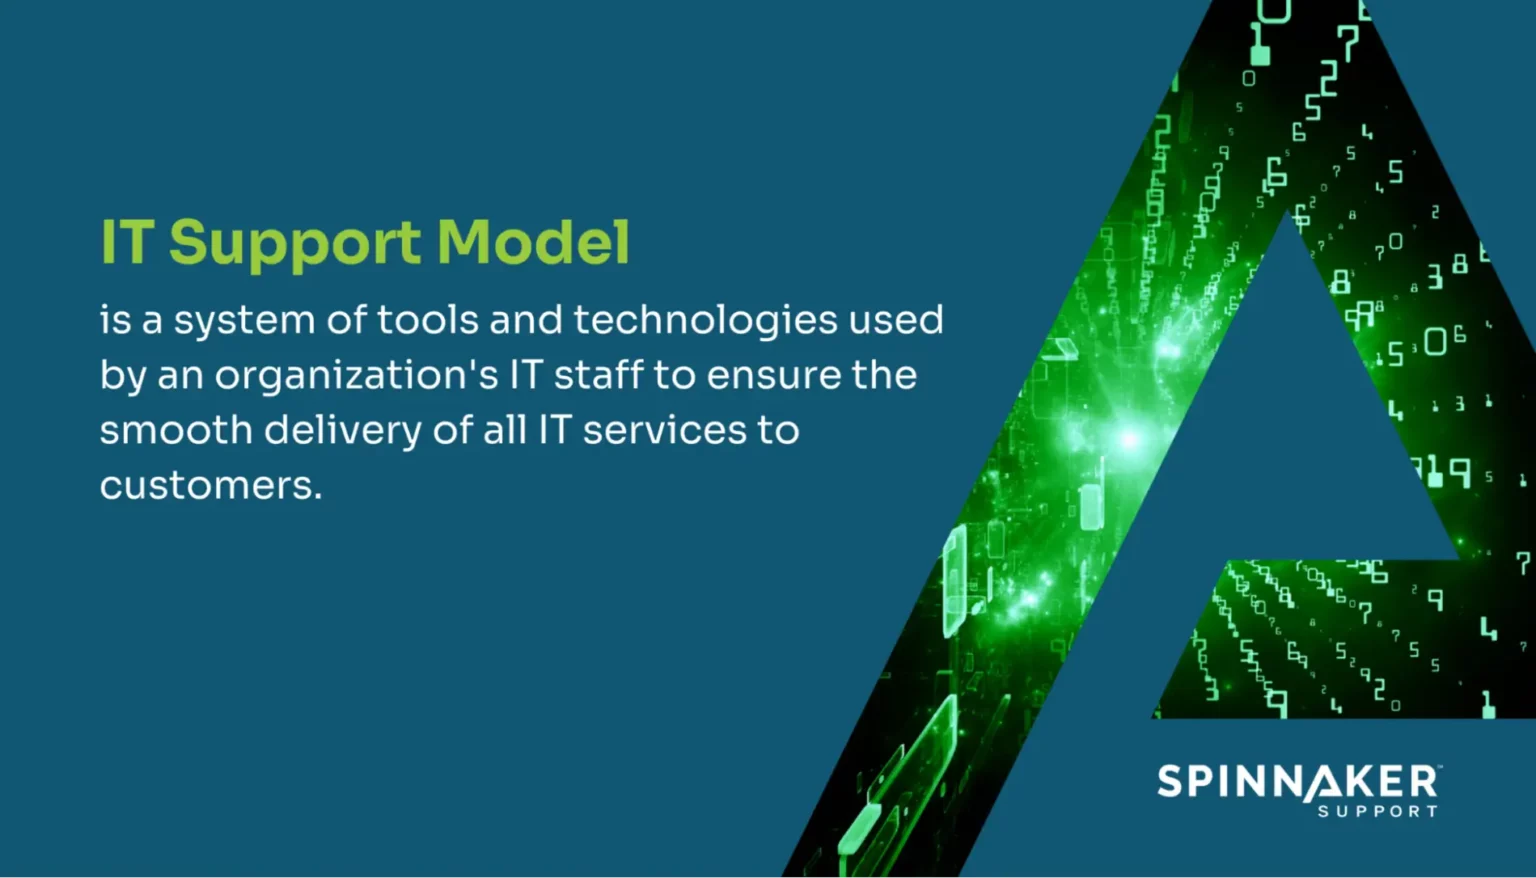 IT support model definition